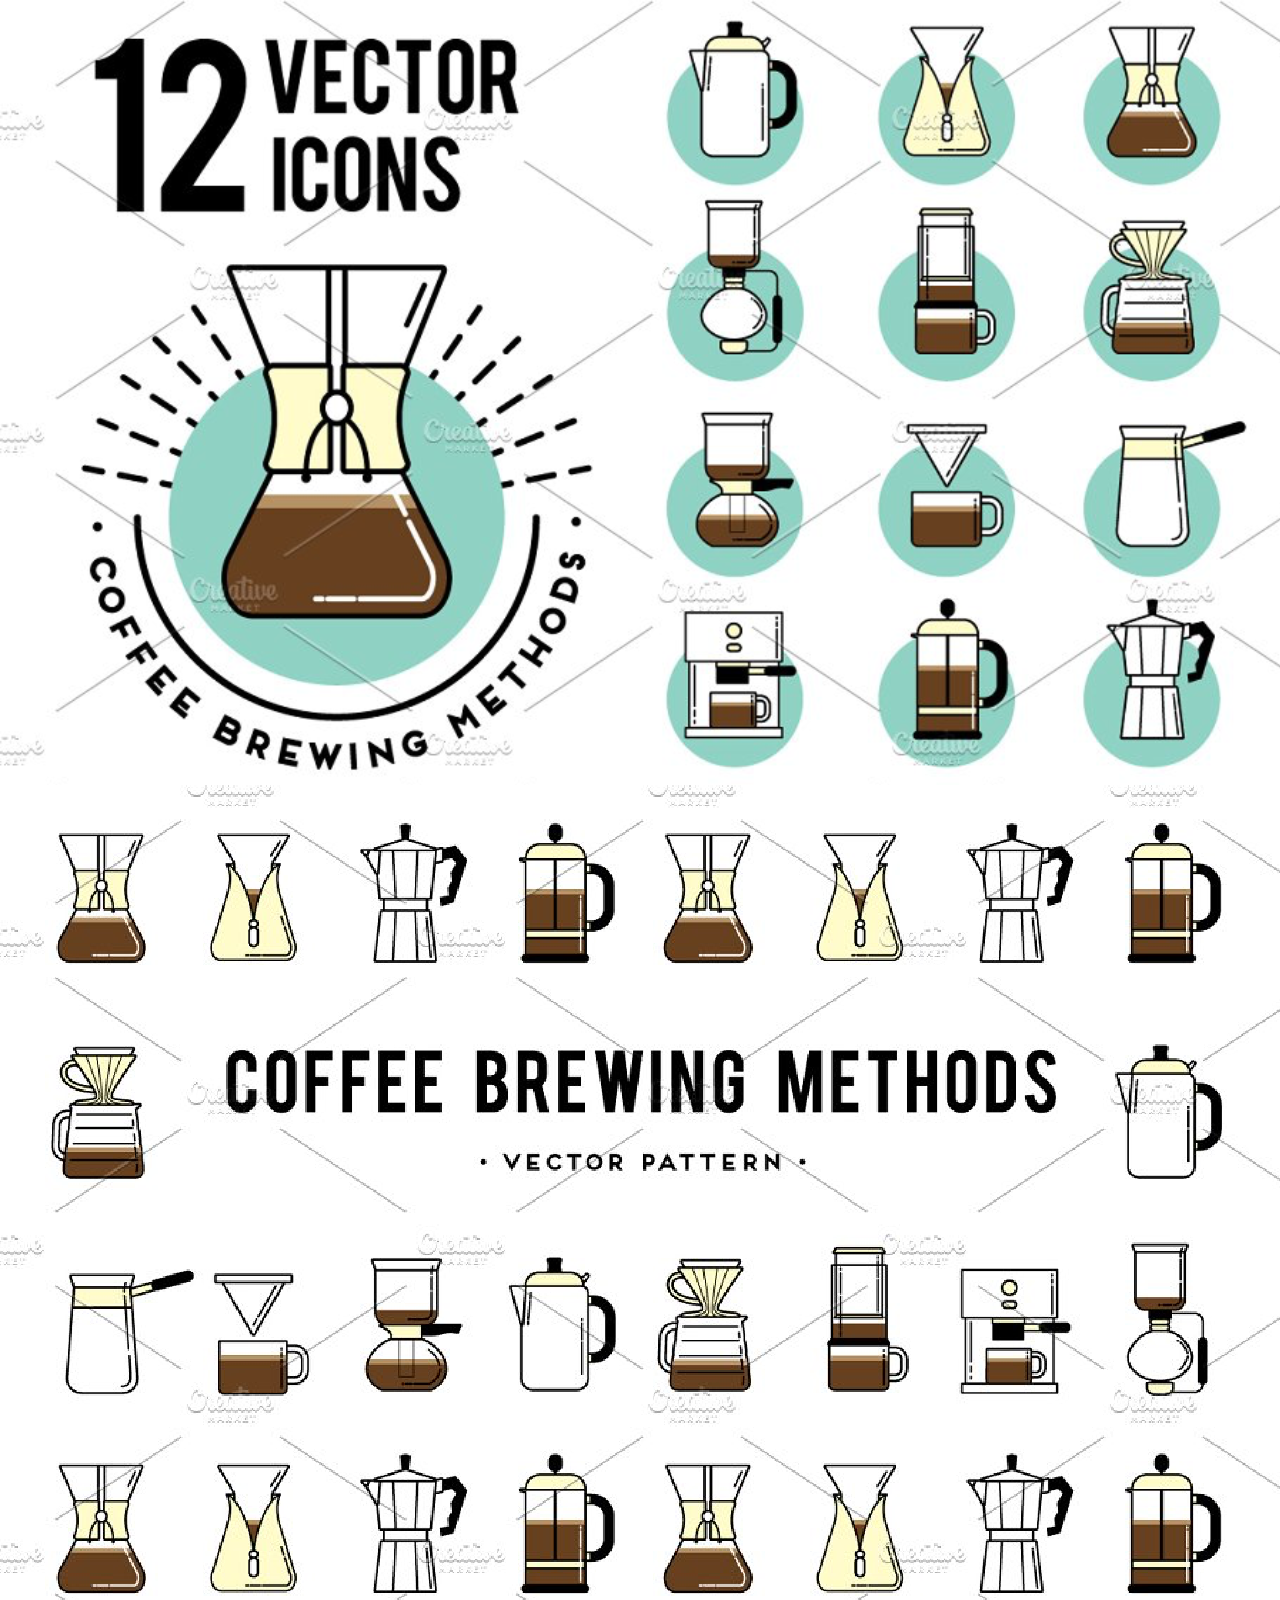 Coffee brewing methods 12 icons pinterest image.